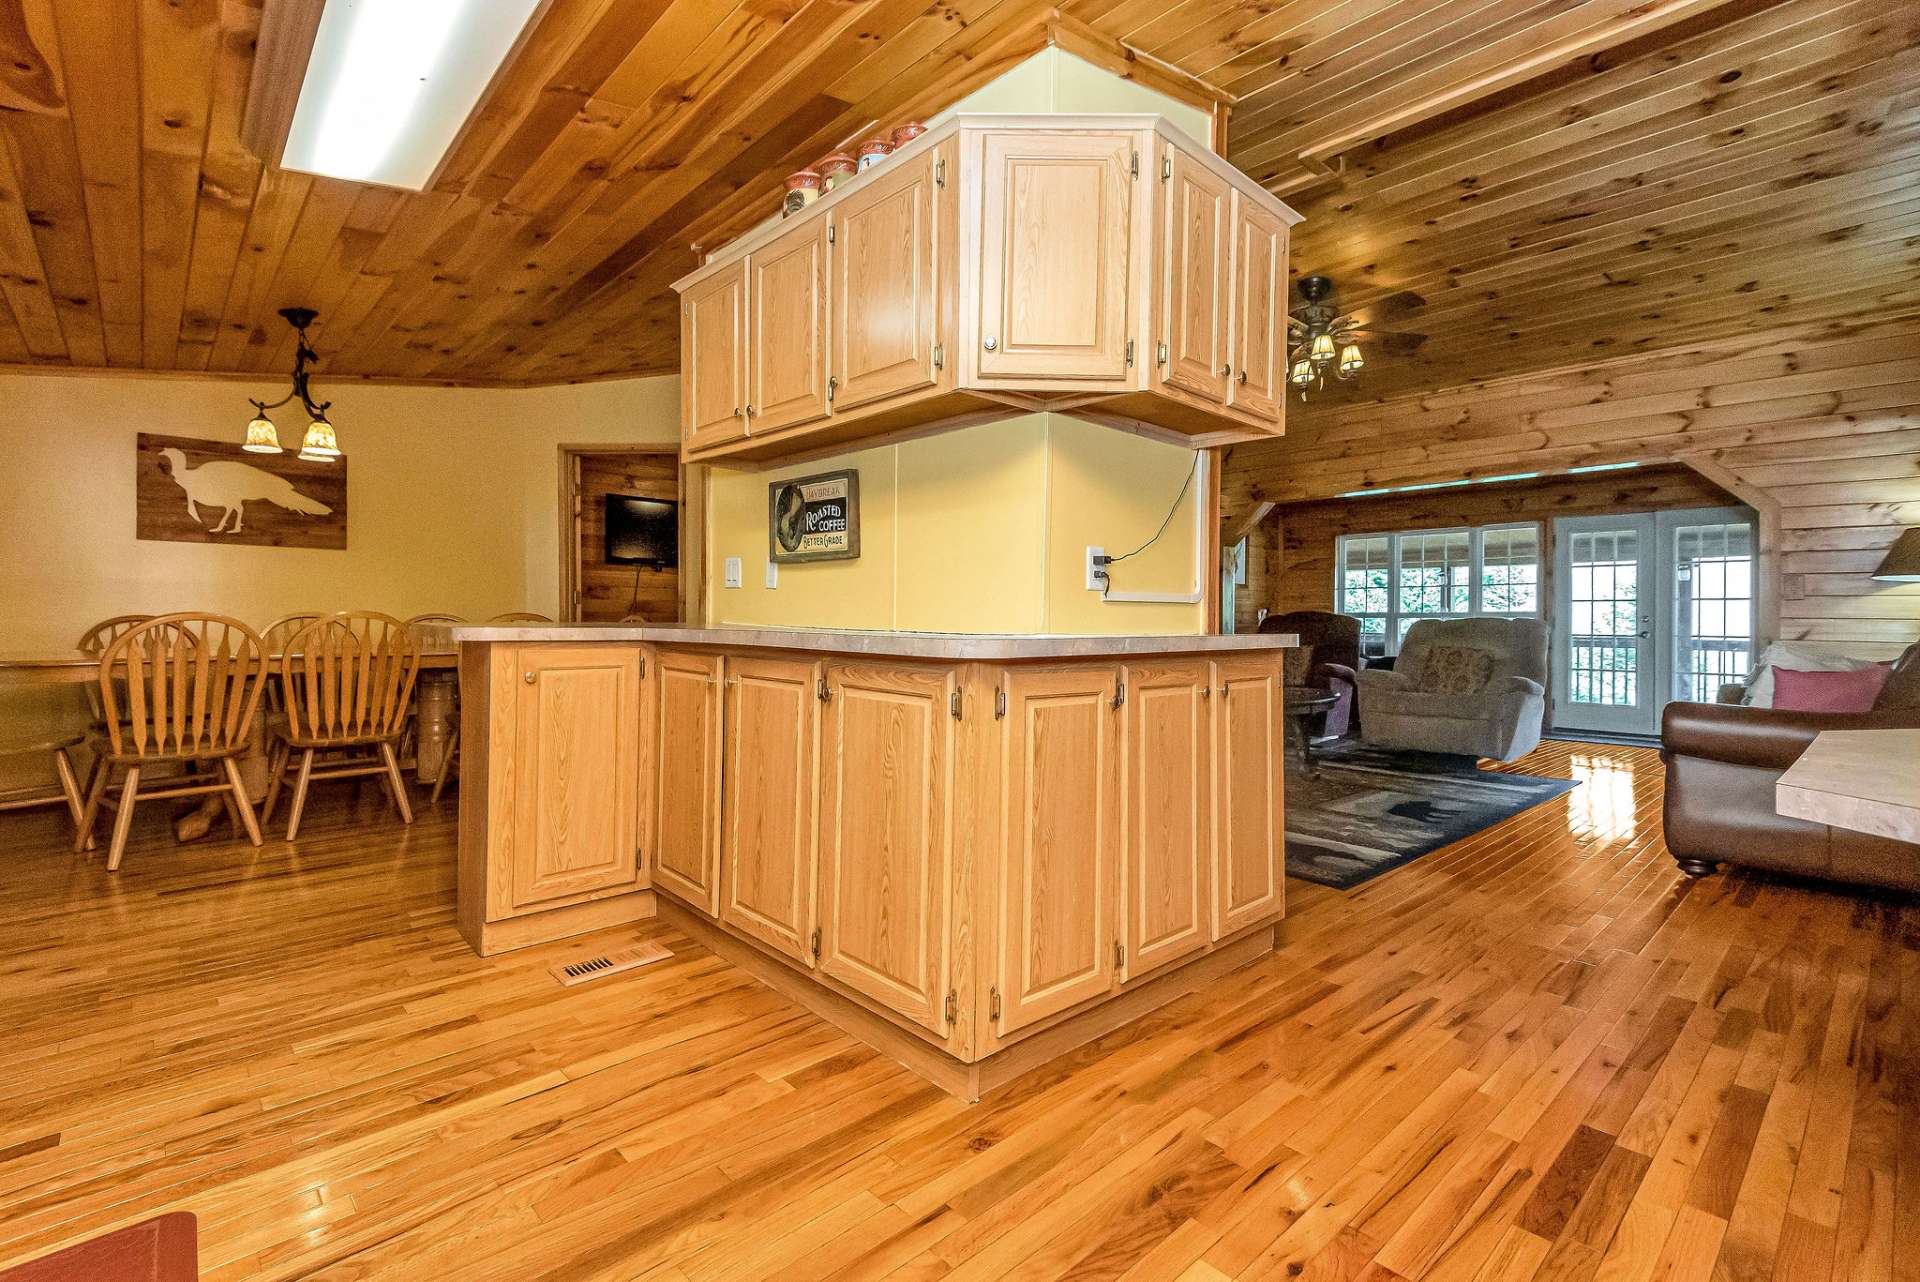 Abundant storage and counter space for the chef in the family's enjoyment.